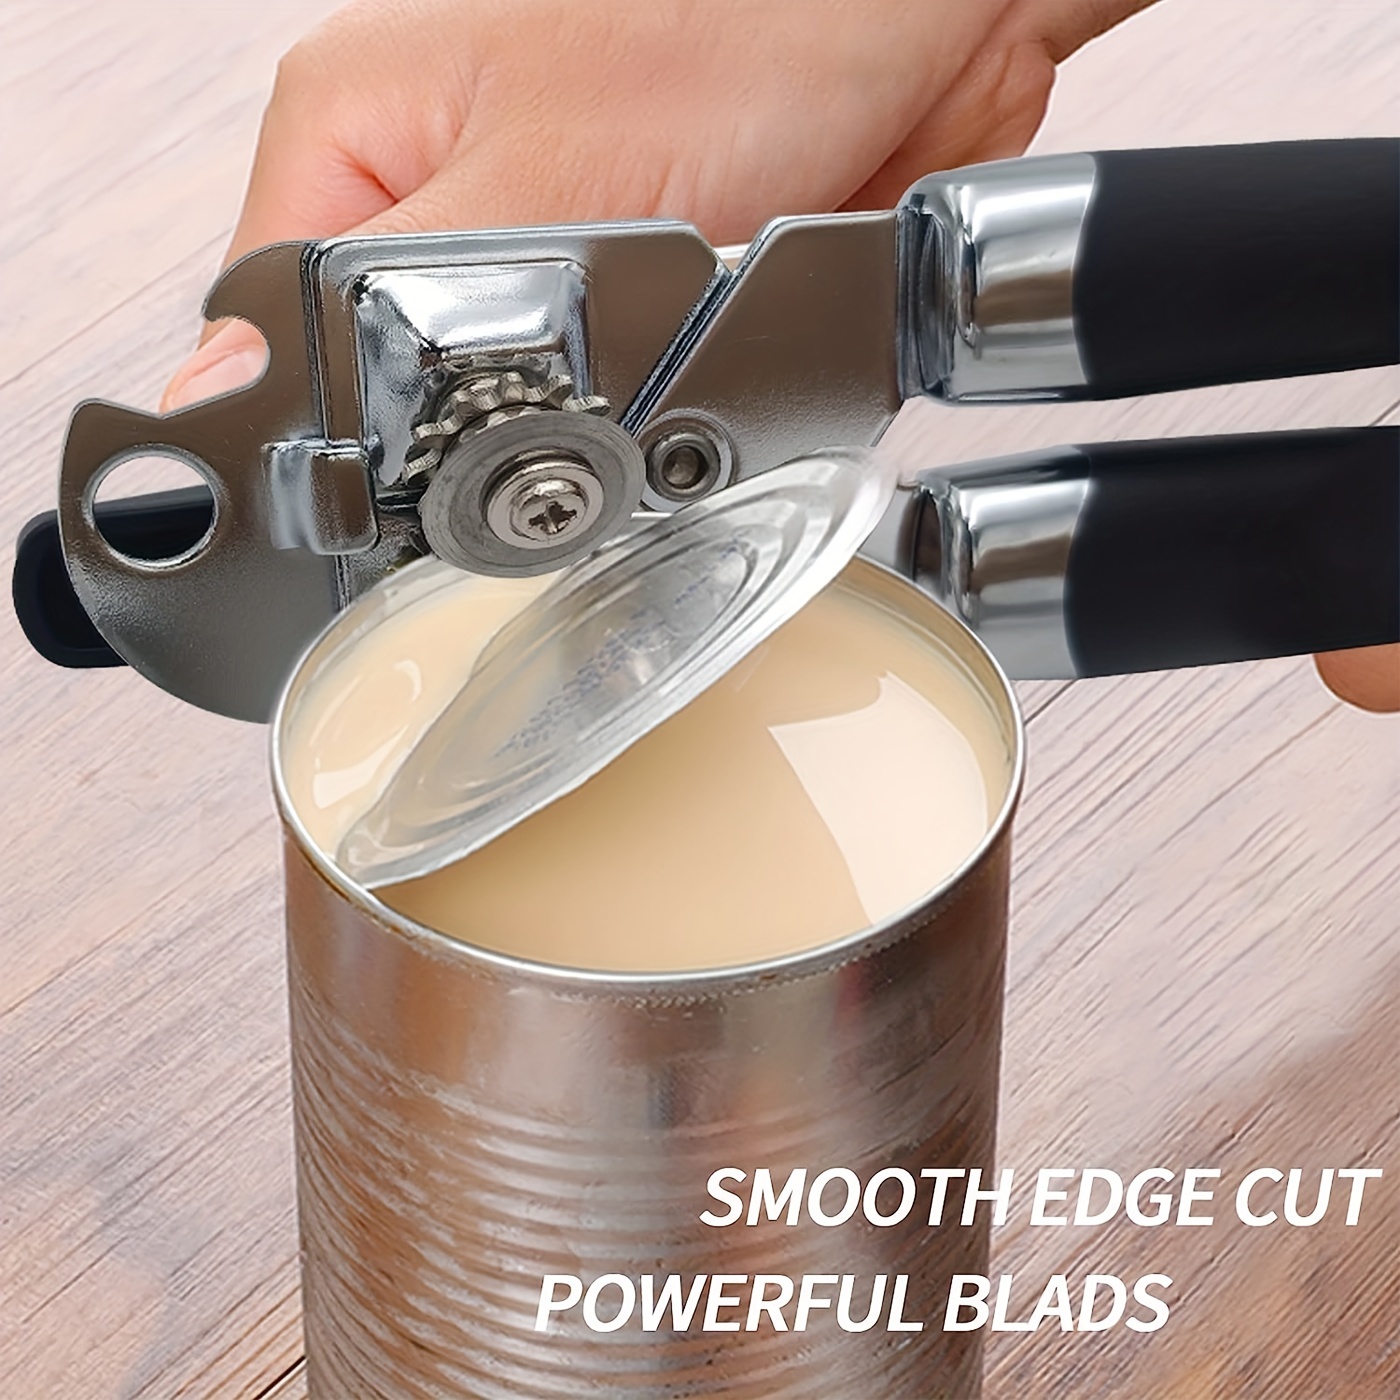 Brand: SmoothEdge Type: Handheld Can Opener Specs: Stainless Steel